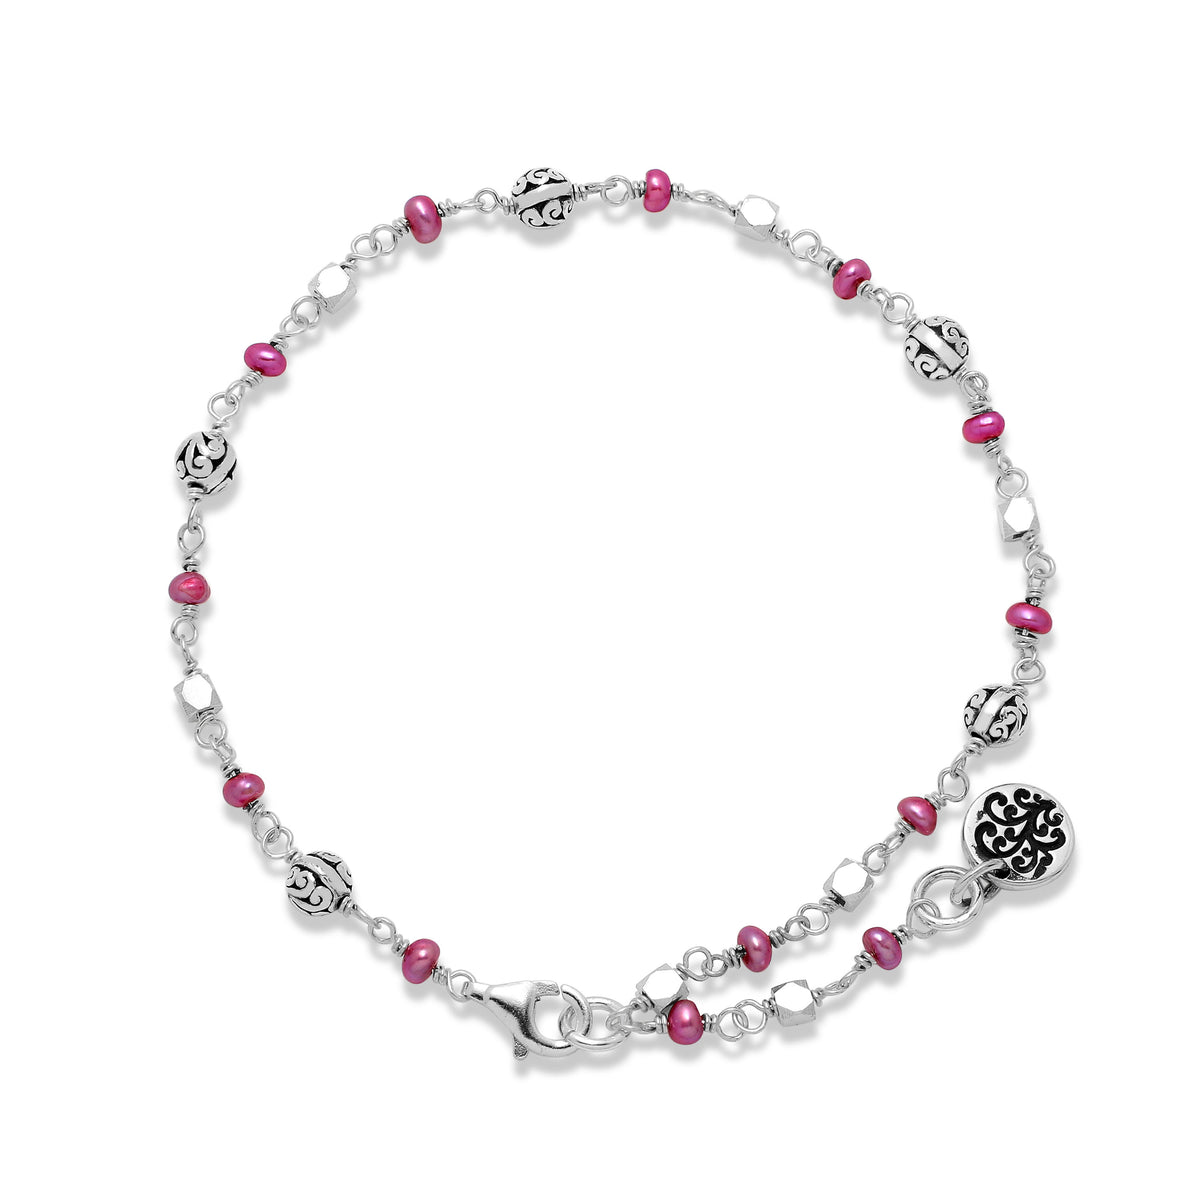 Pink Pearl Bead (3mm) with Scroll Sterling Silver Bead (4mm) Wire-Wrapped Bracelet. <br> 7 1/5'' L